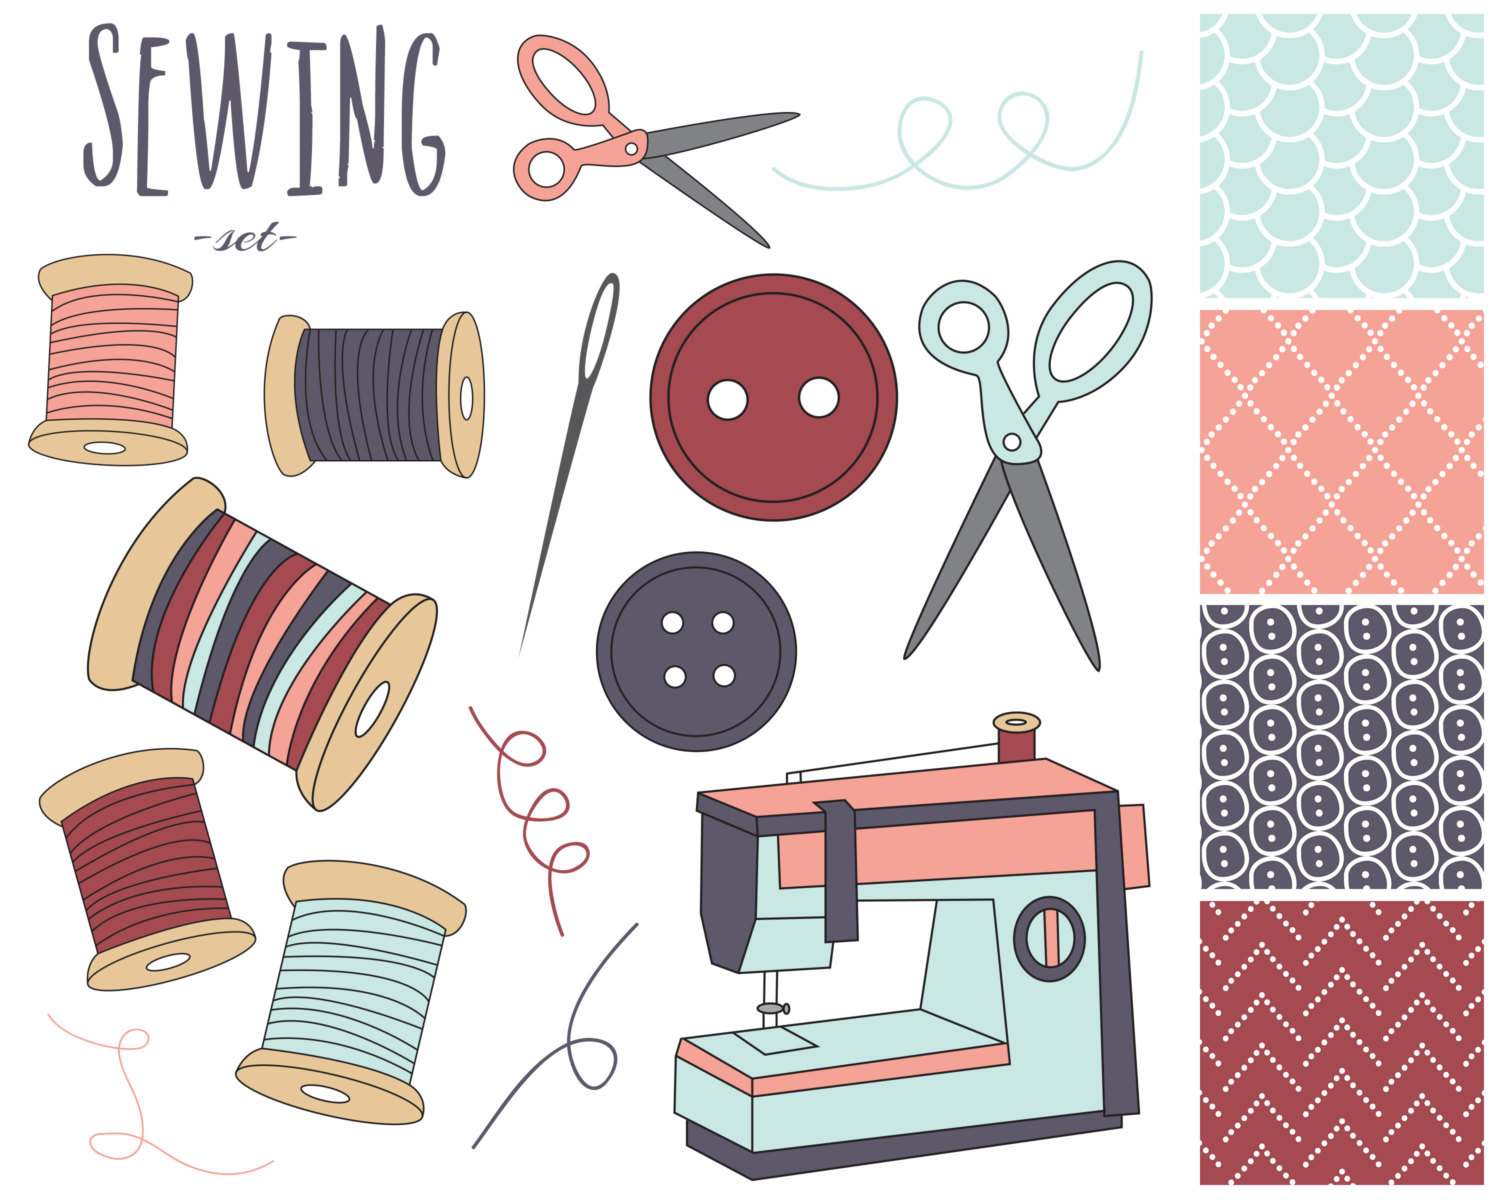 Sewing kit clipart 